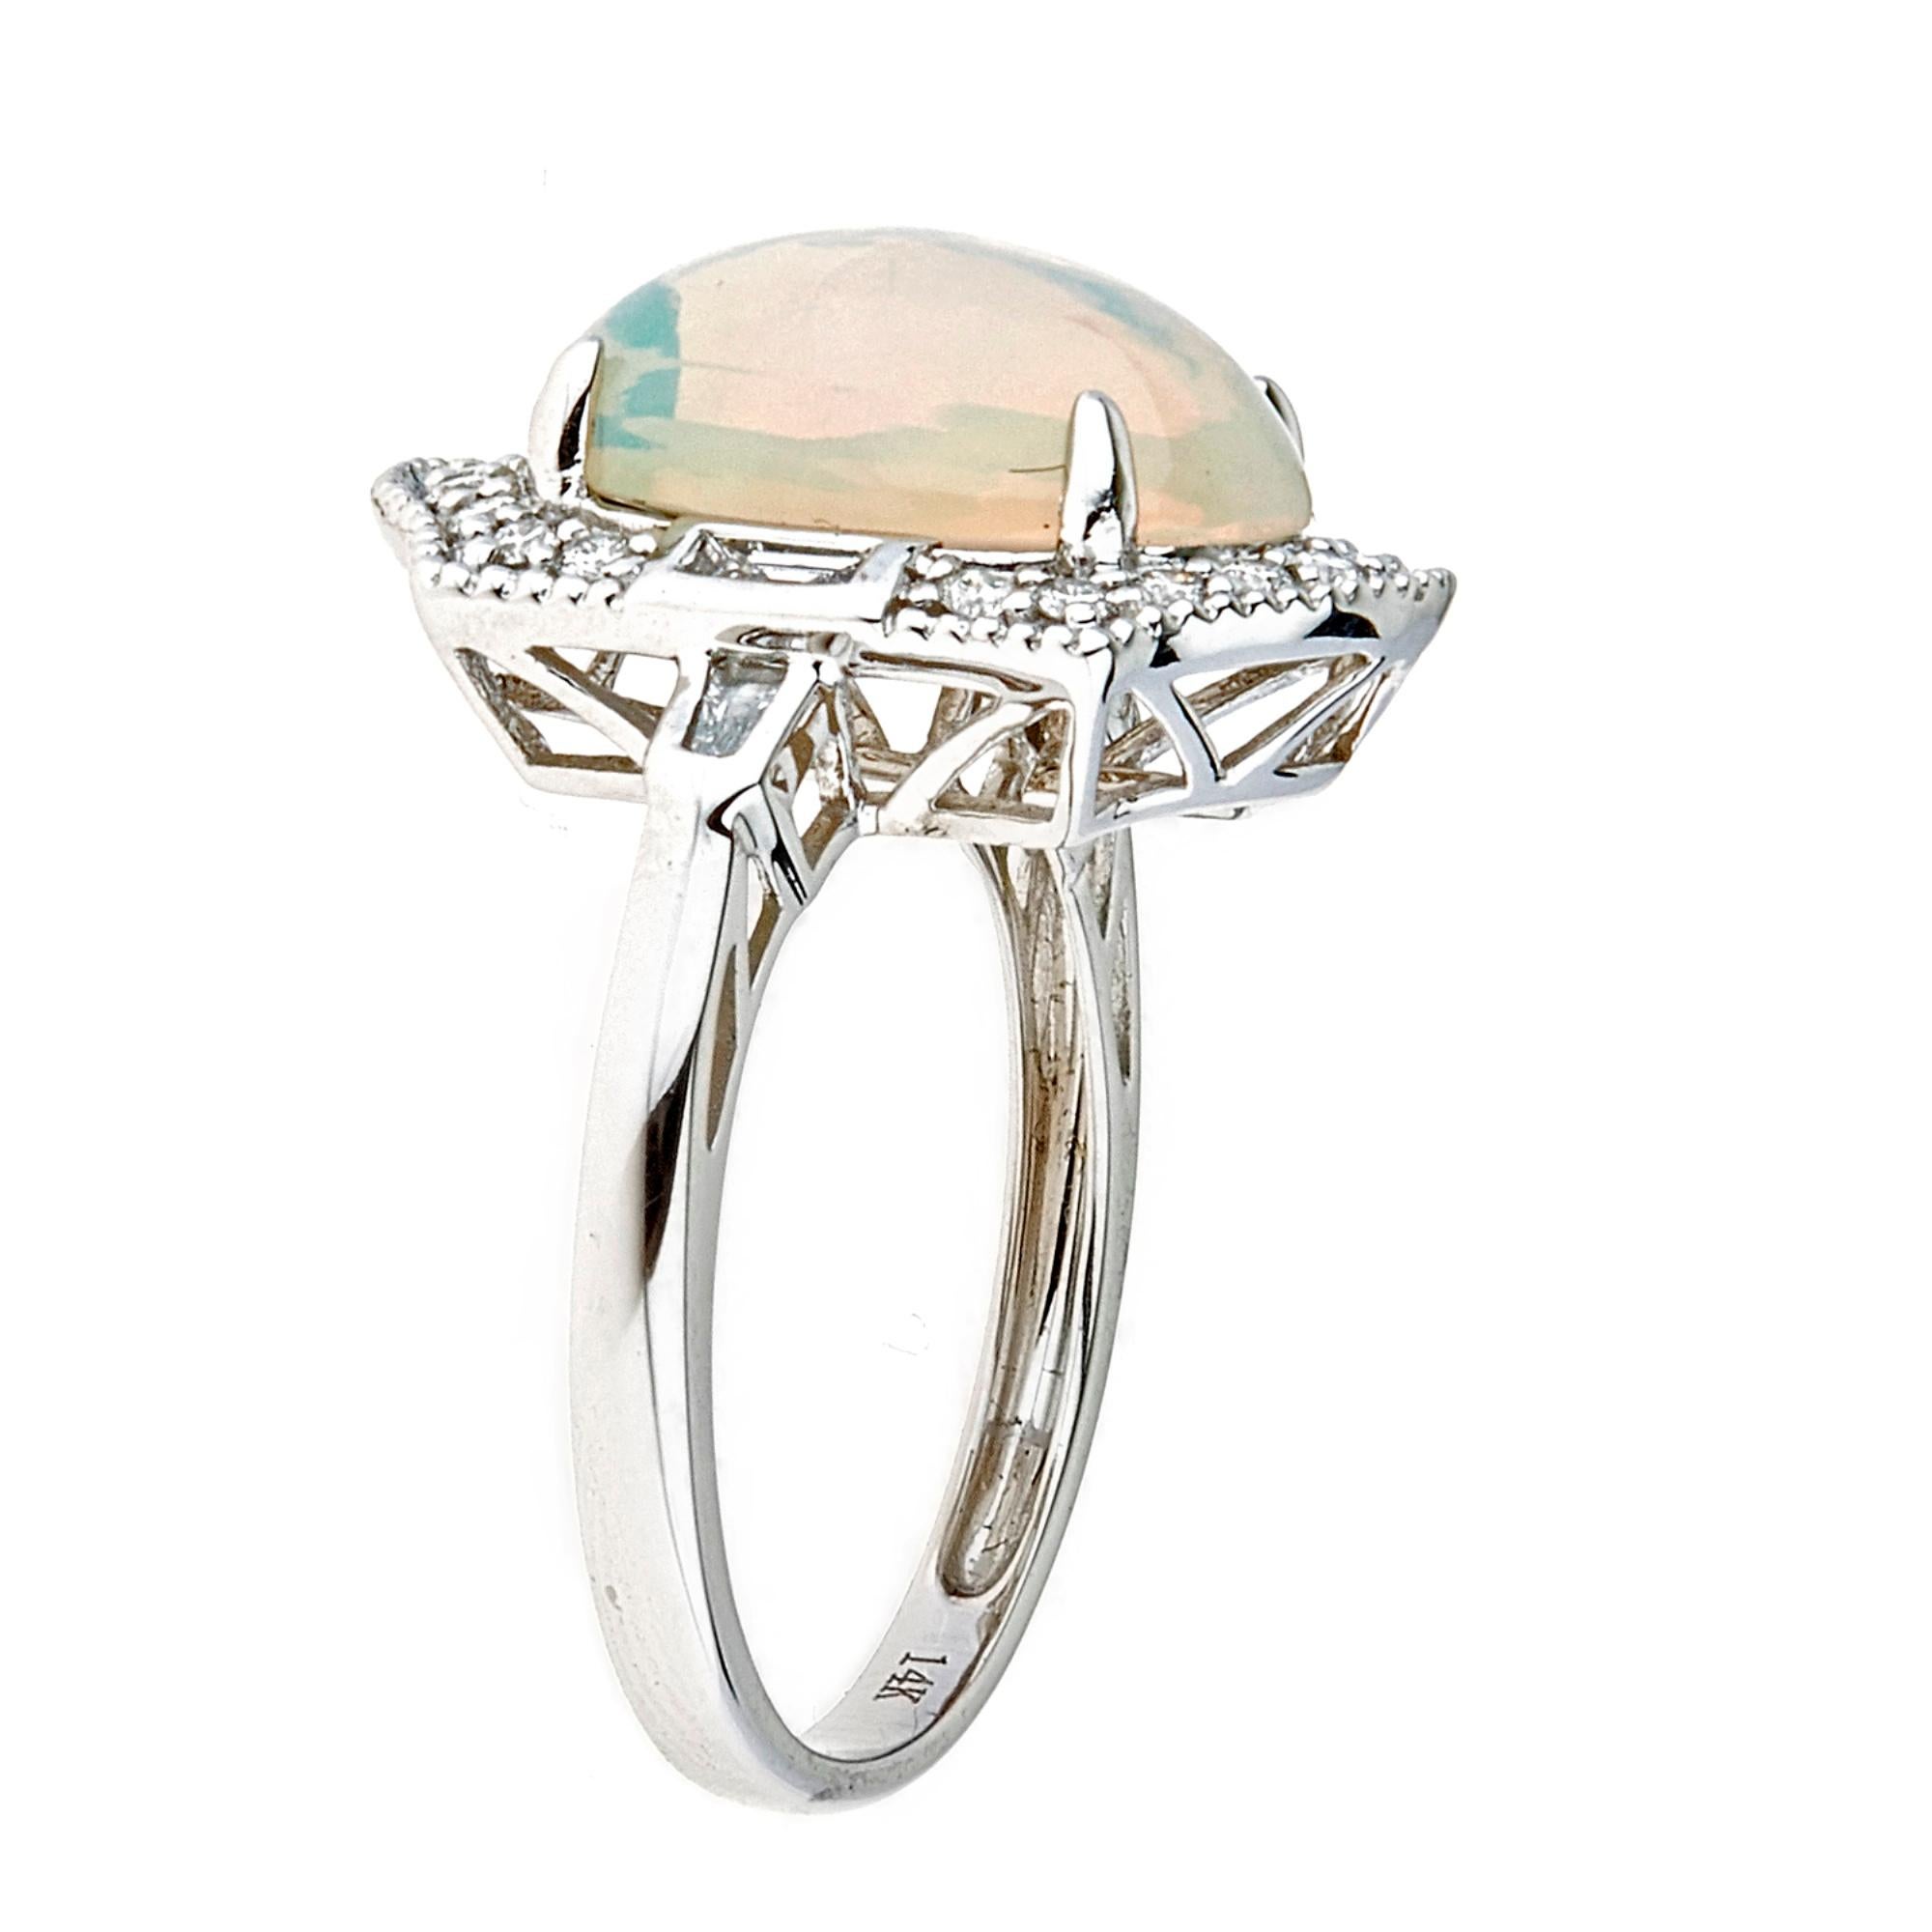 Decorate yourself in elegance with this Ring is crafted from 14-karat White Gold by Gin & Grace. This Ring is made up of 10x14 mm Oval-Cab (1 pcs) 4.49 carat Ethiopian Opal and Round-cut White Diamond (20 Pcs) 0.26 Carat, Baguette-cut White Diamond